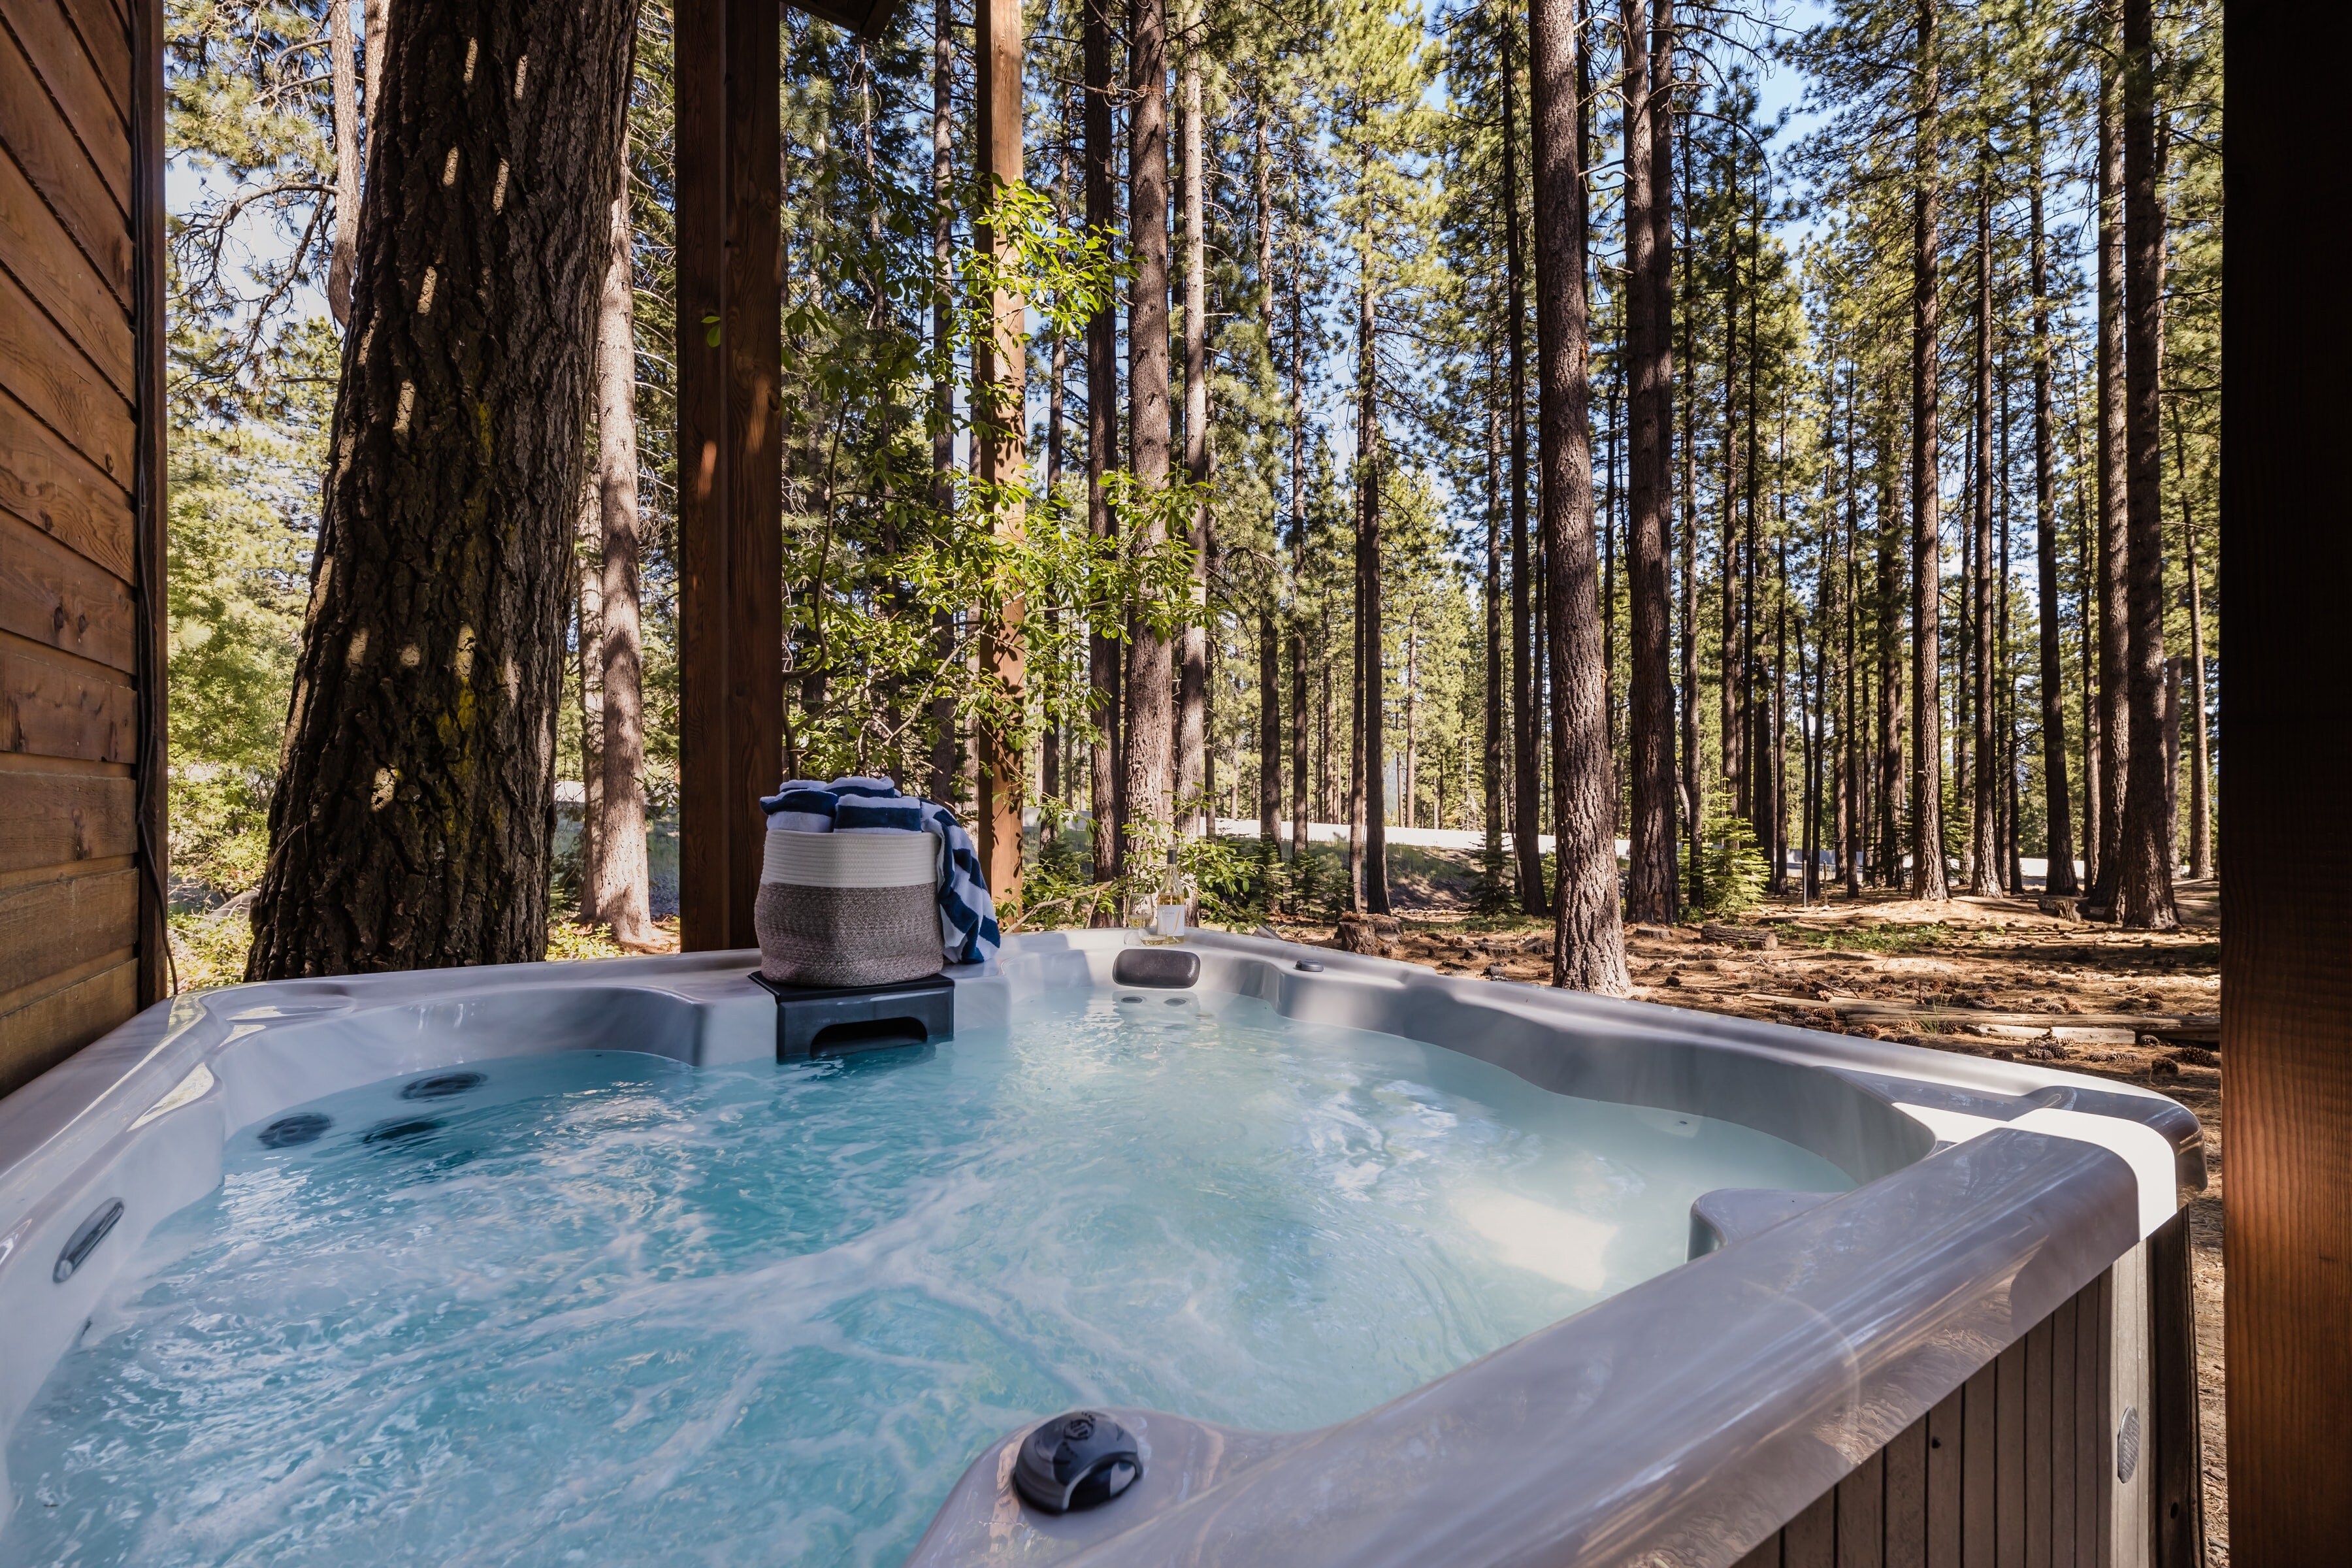 Jacuzzi in the woods.